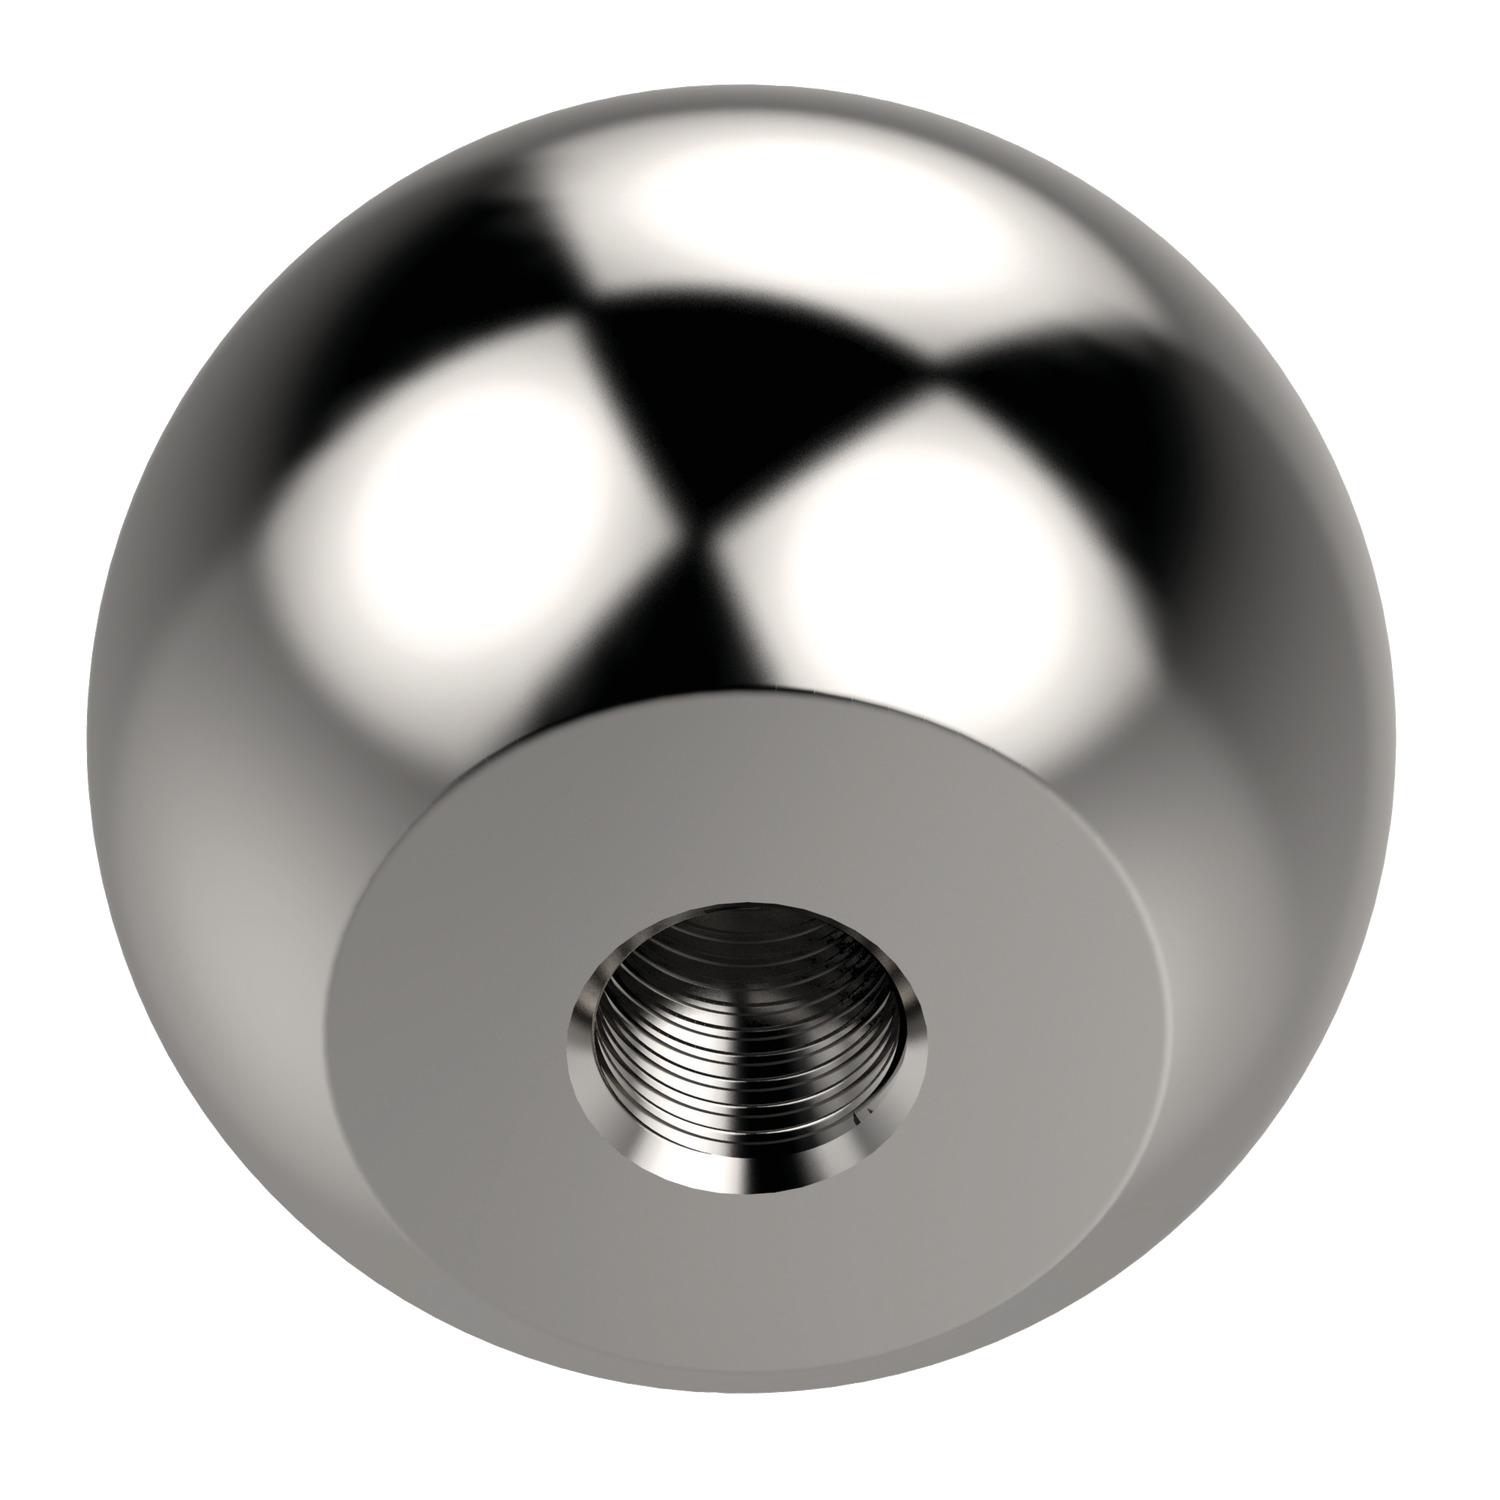 73004 - Ball Knobs - Stainless Steel